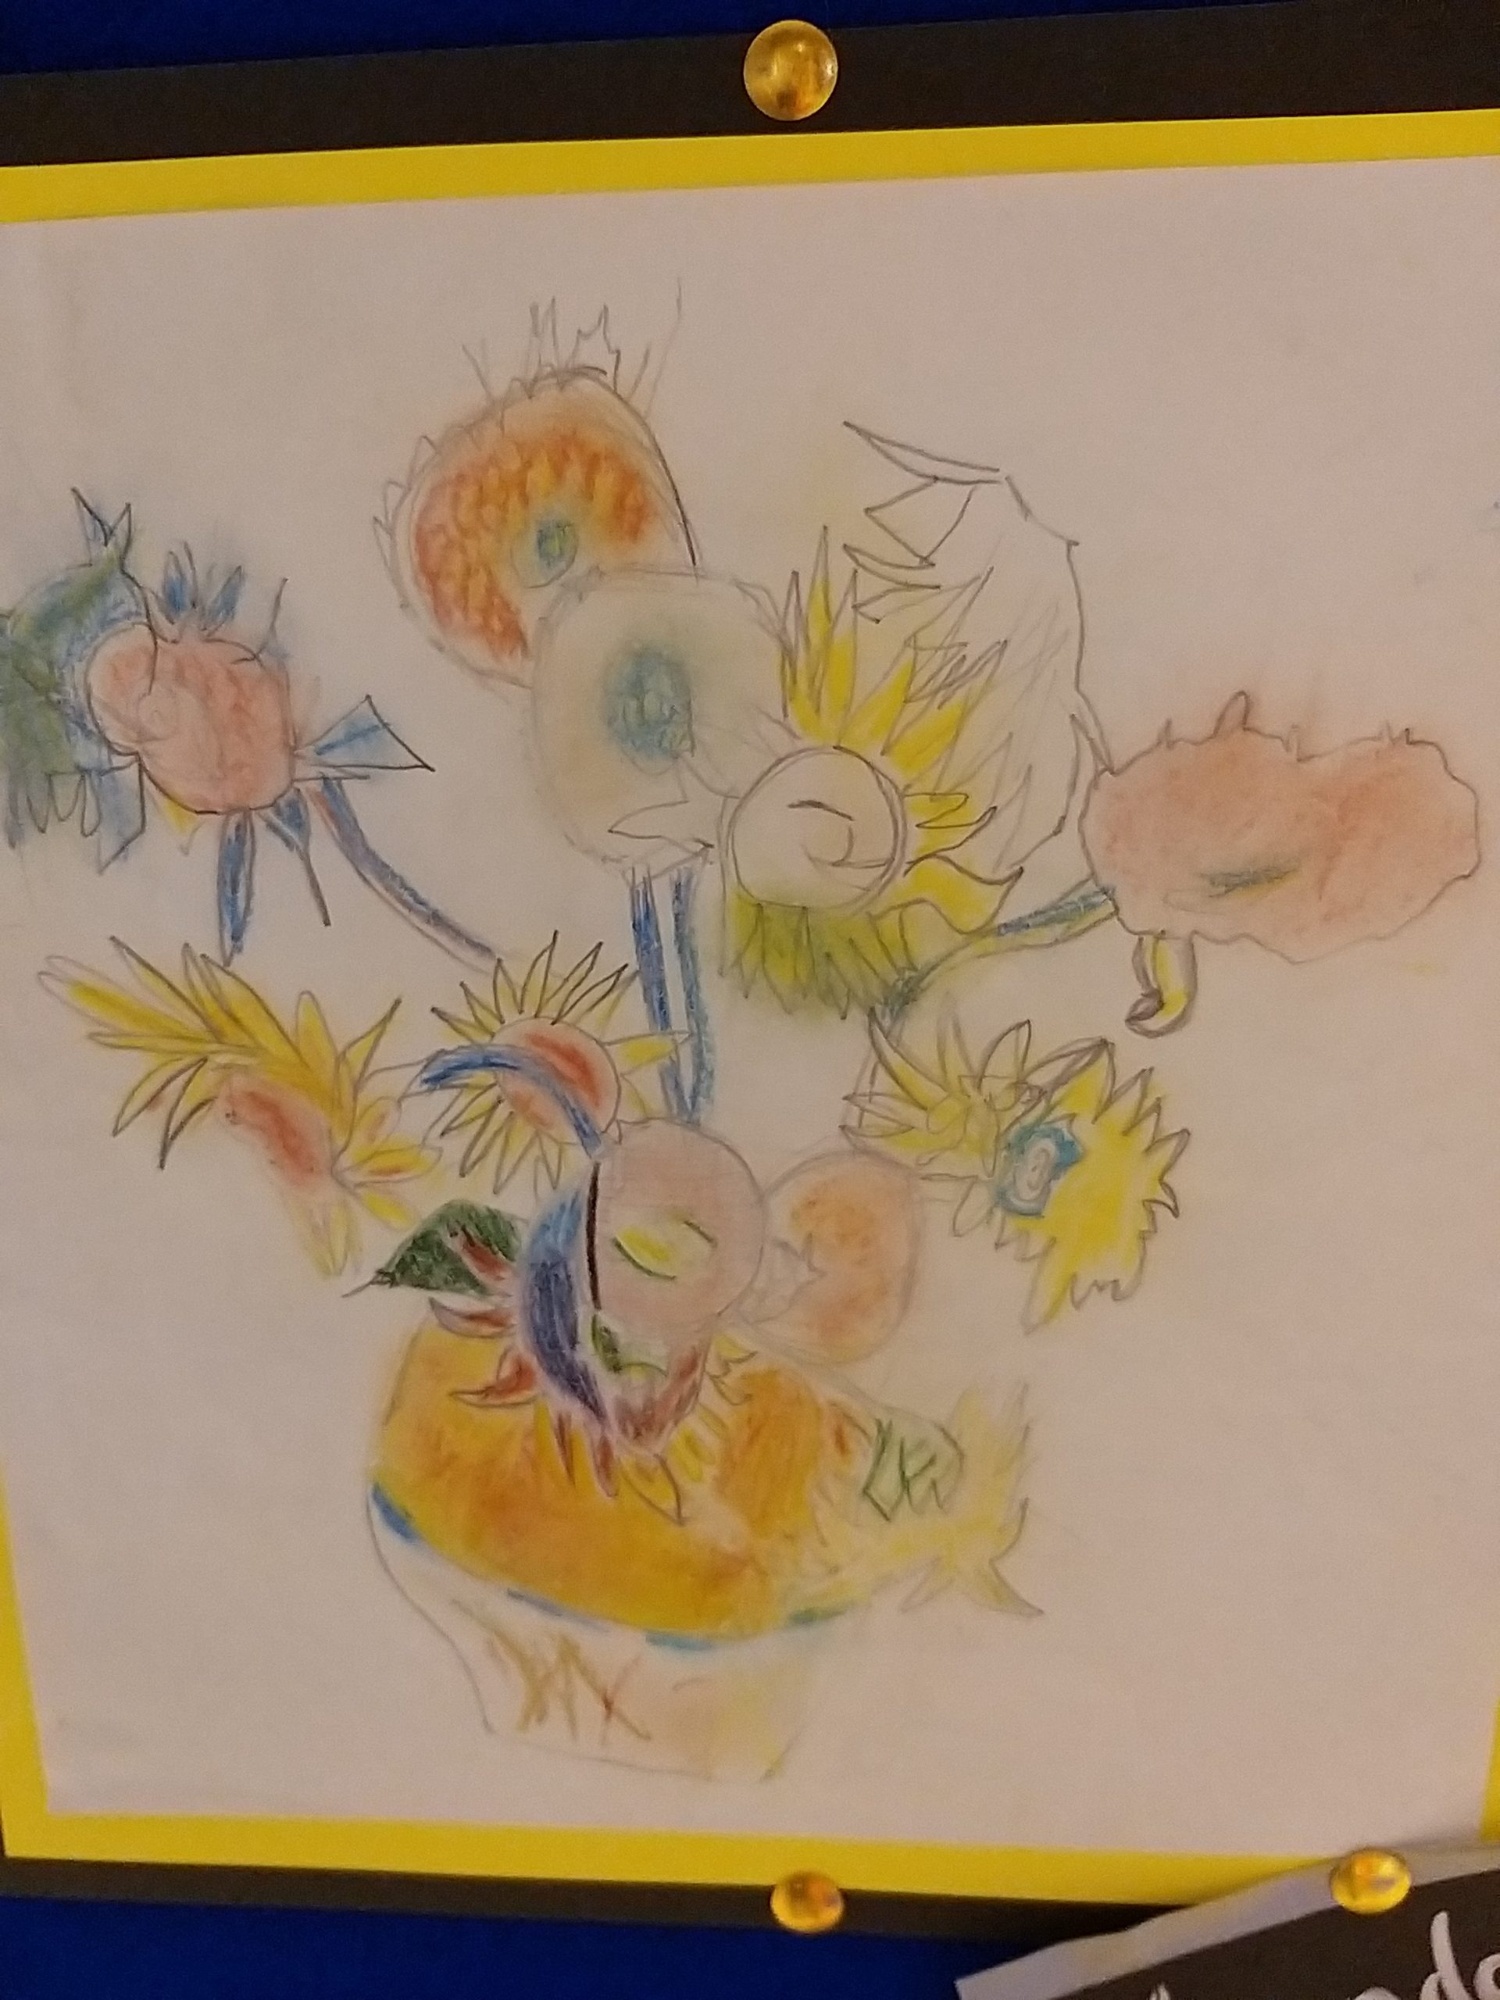 A picture, drawn by a pupil, inspired by Van Gogh's 'Sunflowers'.